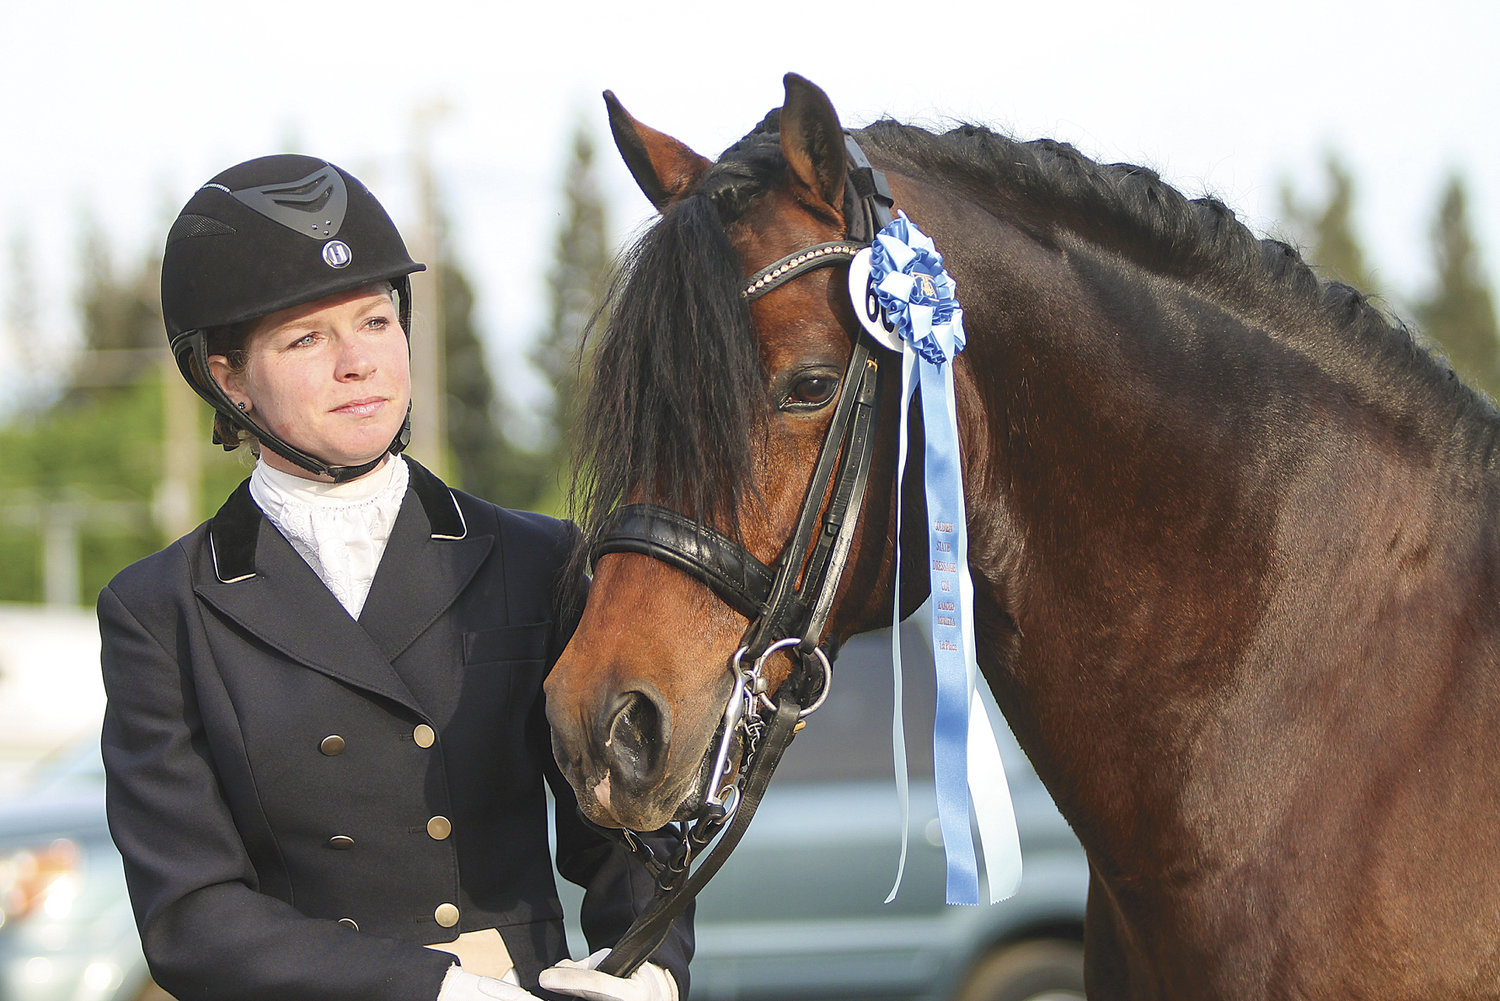 JESSICA WISDOM, of Battle Ground, stands next to her prize-winning pony, North Forks Cardi, a 13-year-old Welsh Cob stallion. Wisdom and Cardi are the only pony-rider combo in the highly competitive world of dressage.